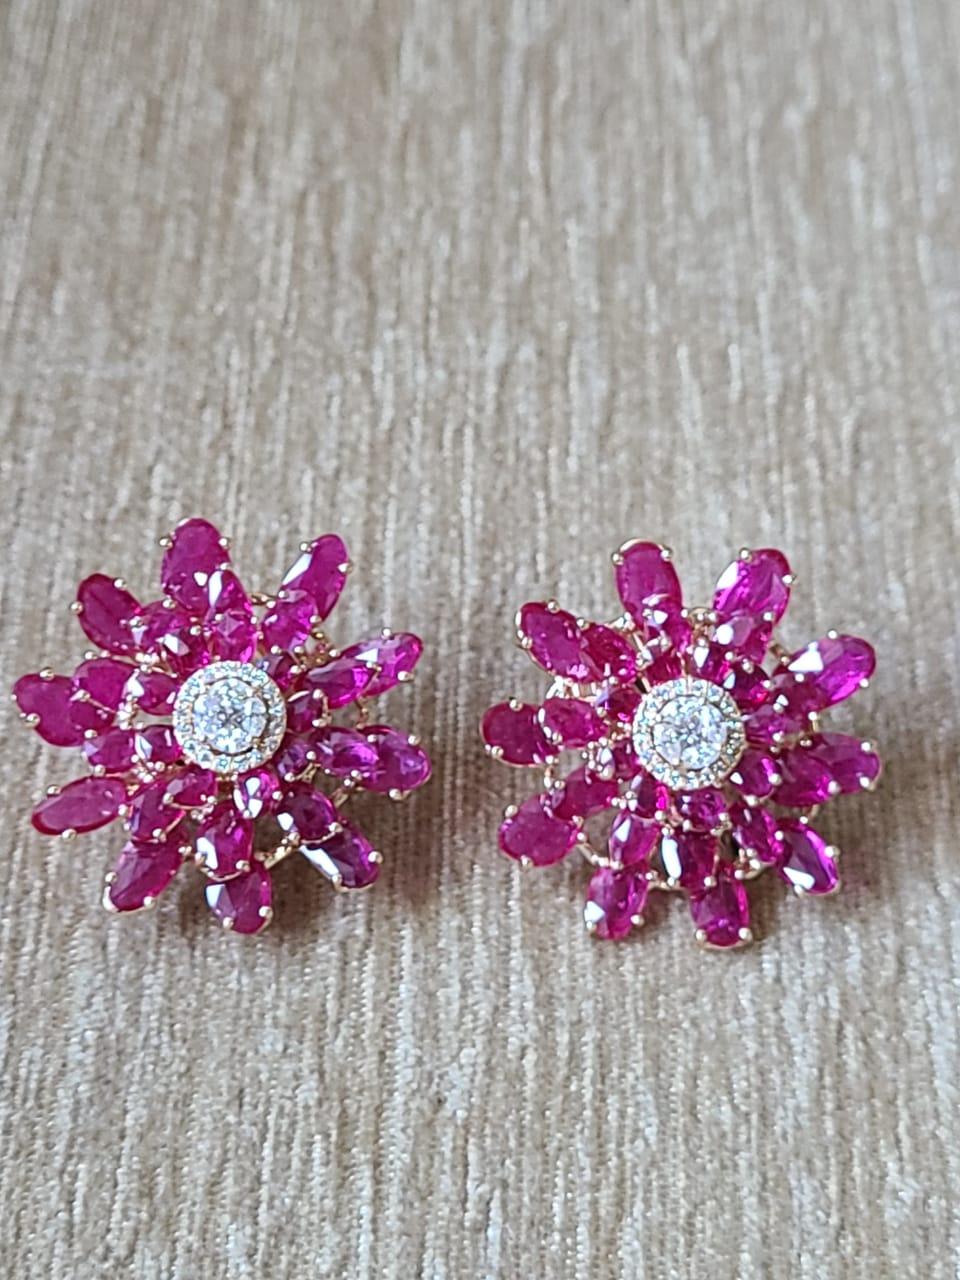 A pair of gorgeous over-size Ruby and Diamonds Stud Earrings made in 18K Gold. The Ruby is of Mozambique origin and weighs 15.89 carats. The combined weight of the Diamonds is 0.62 carats. The gross weight of the Earrings is 14.74 grams. The